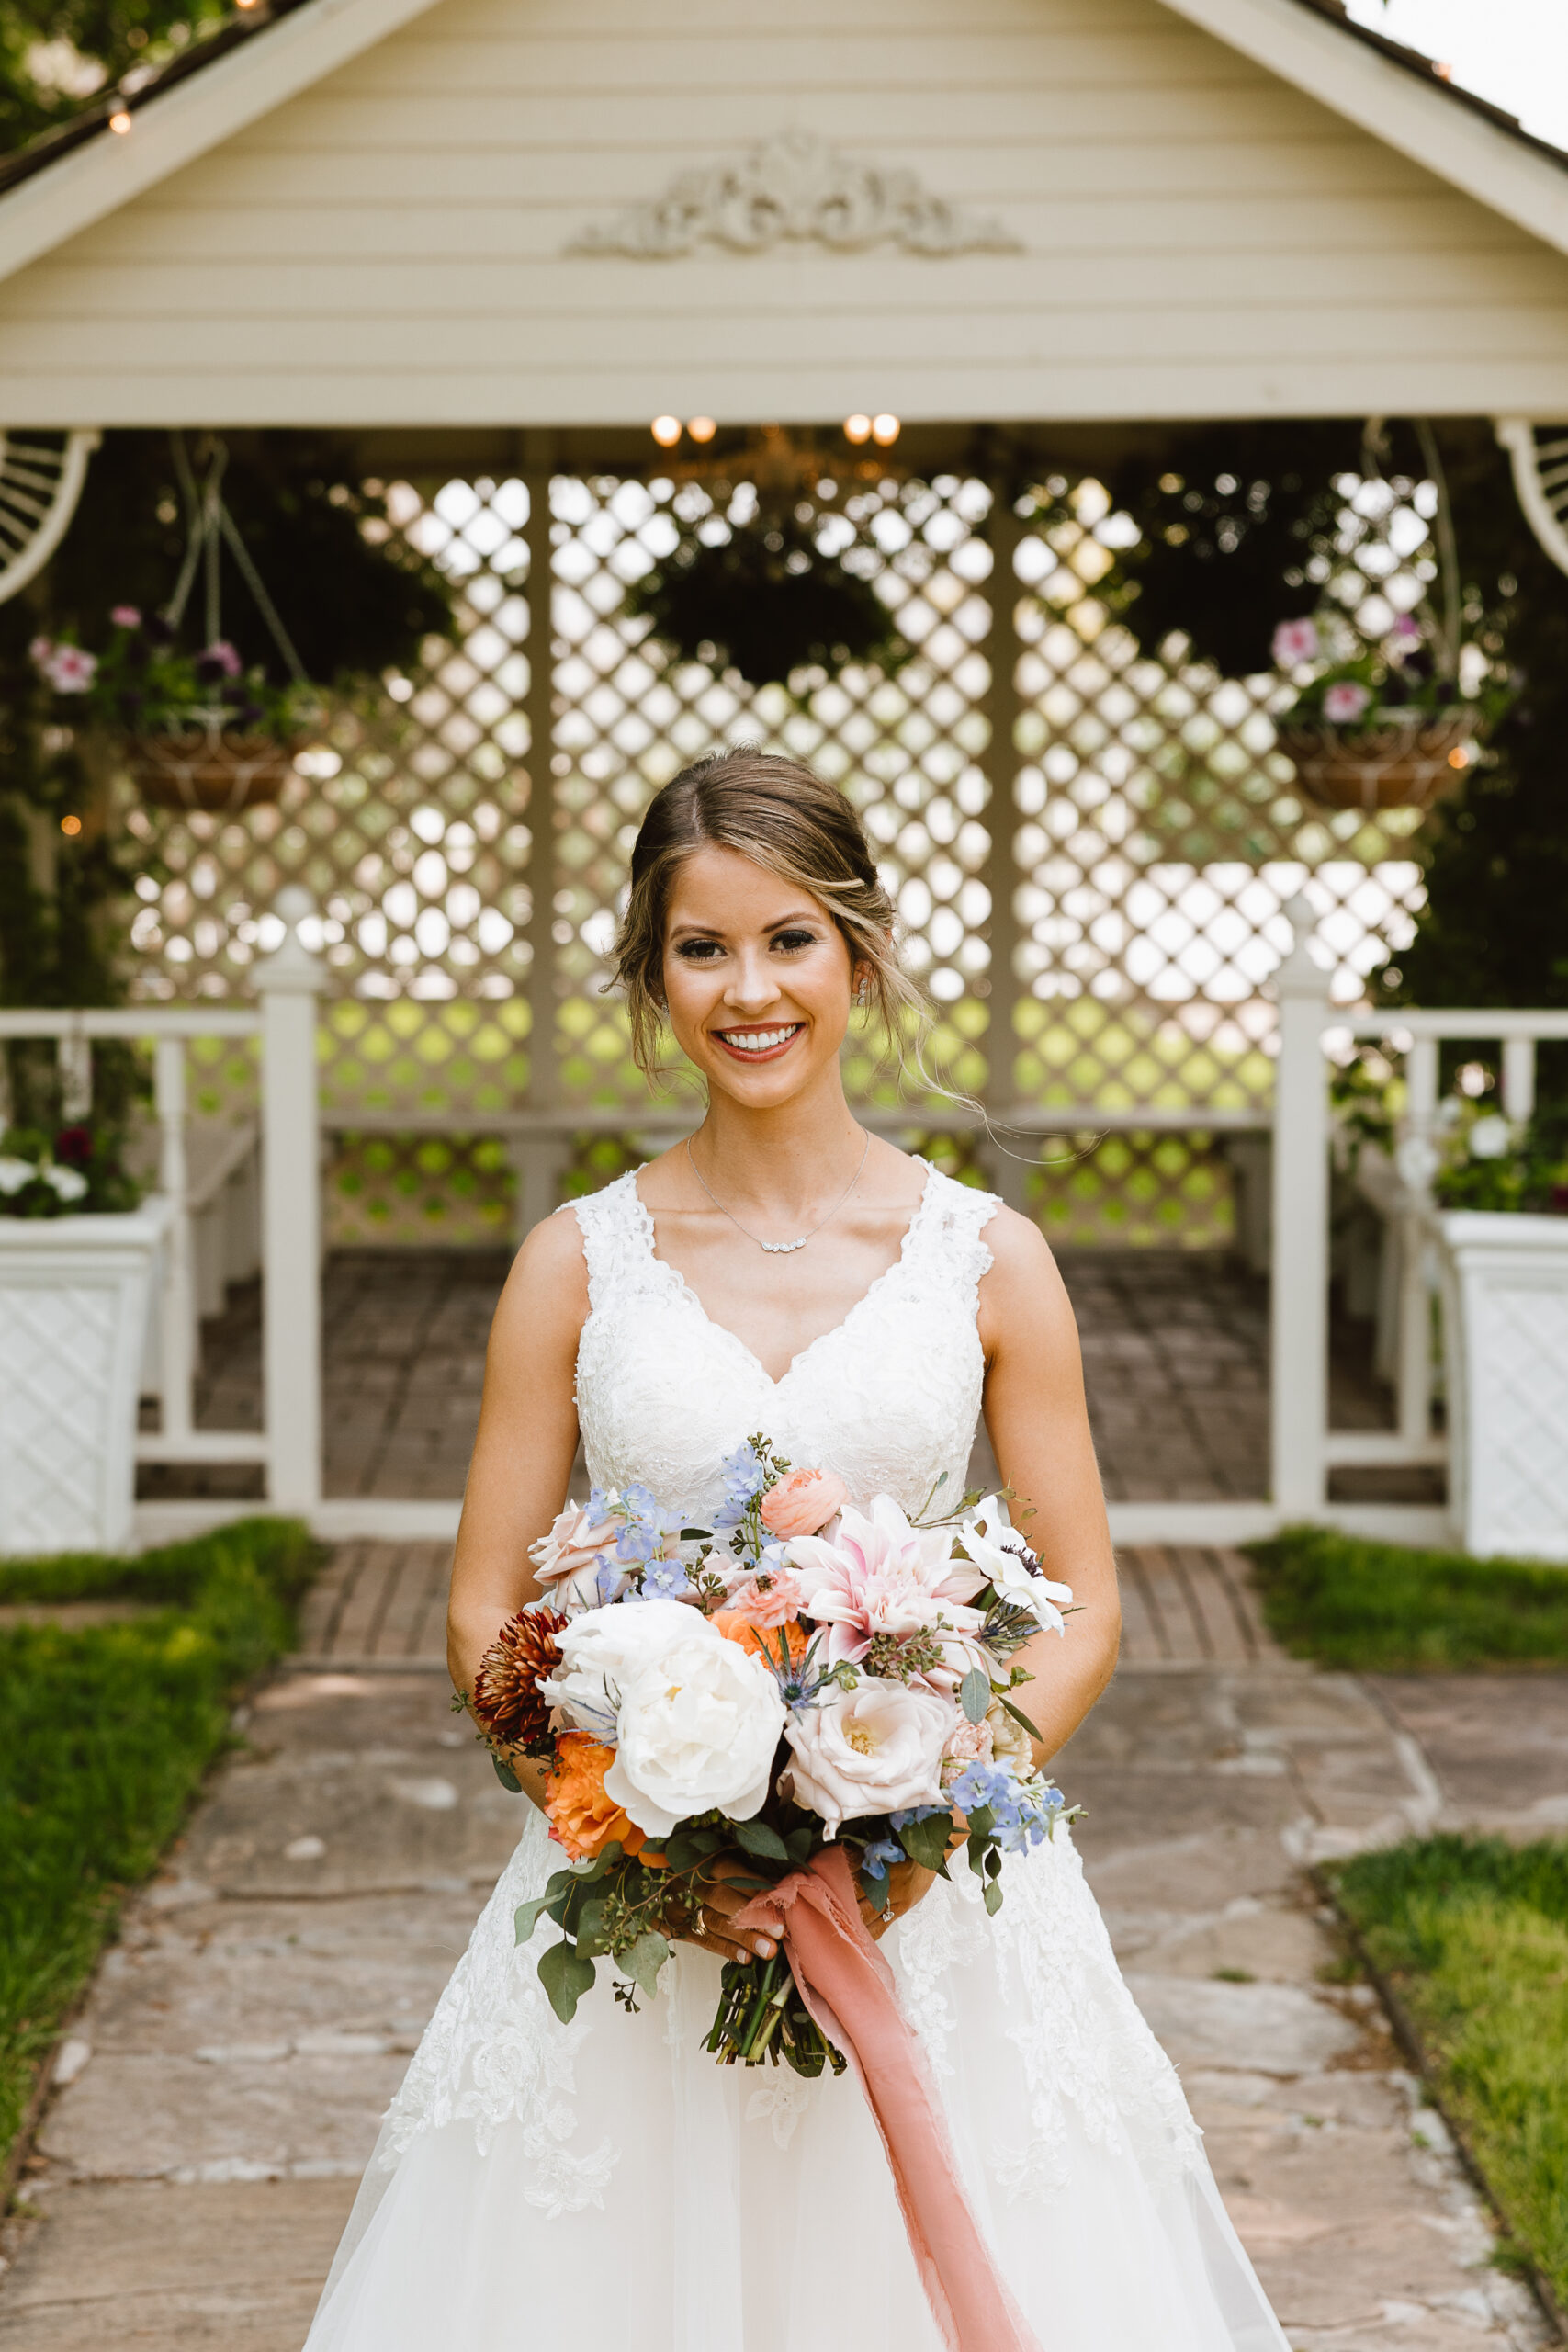 Bride at Country Home Weddings